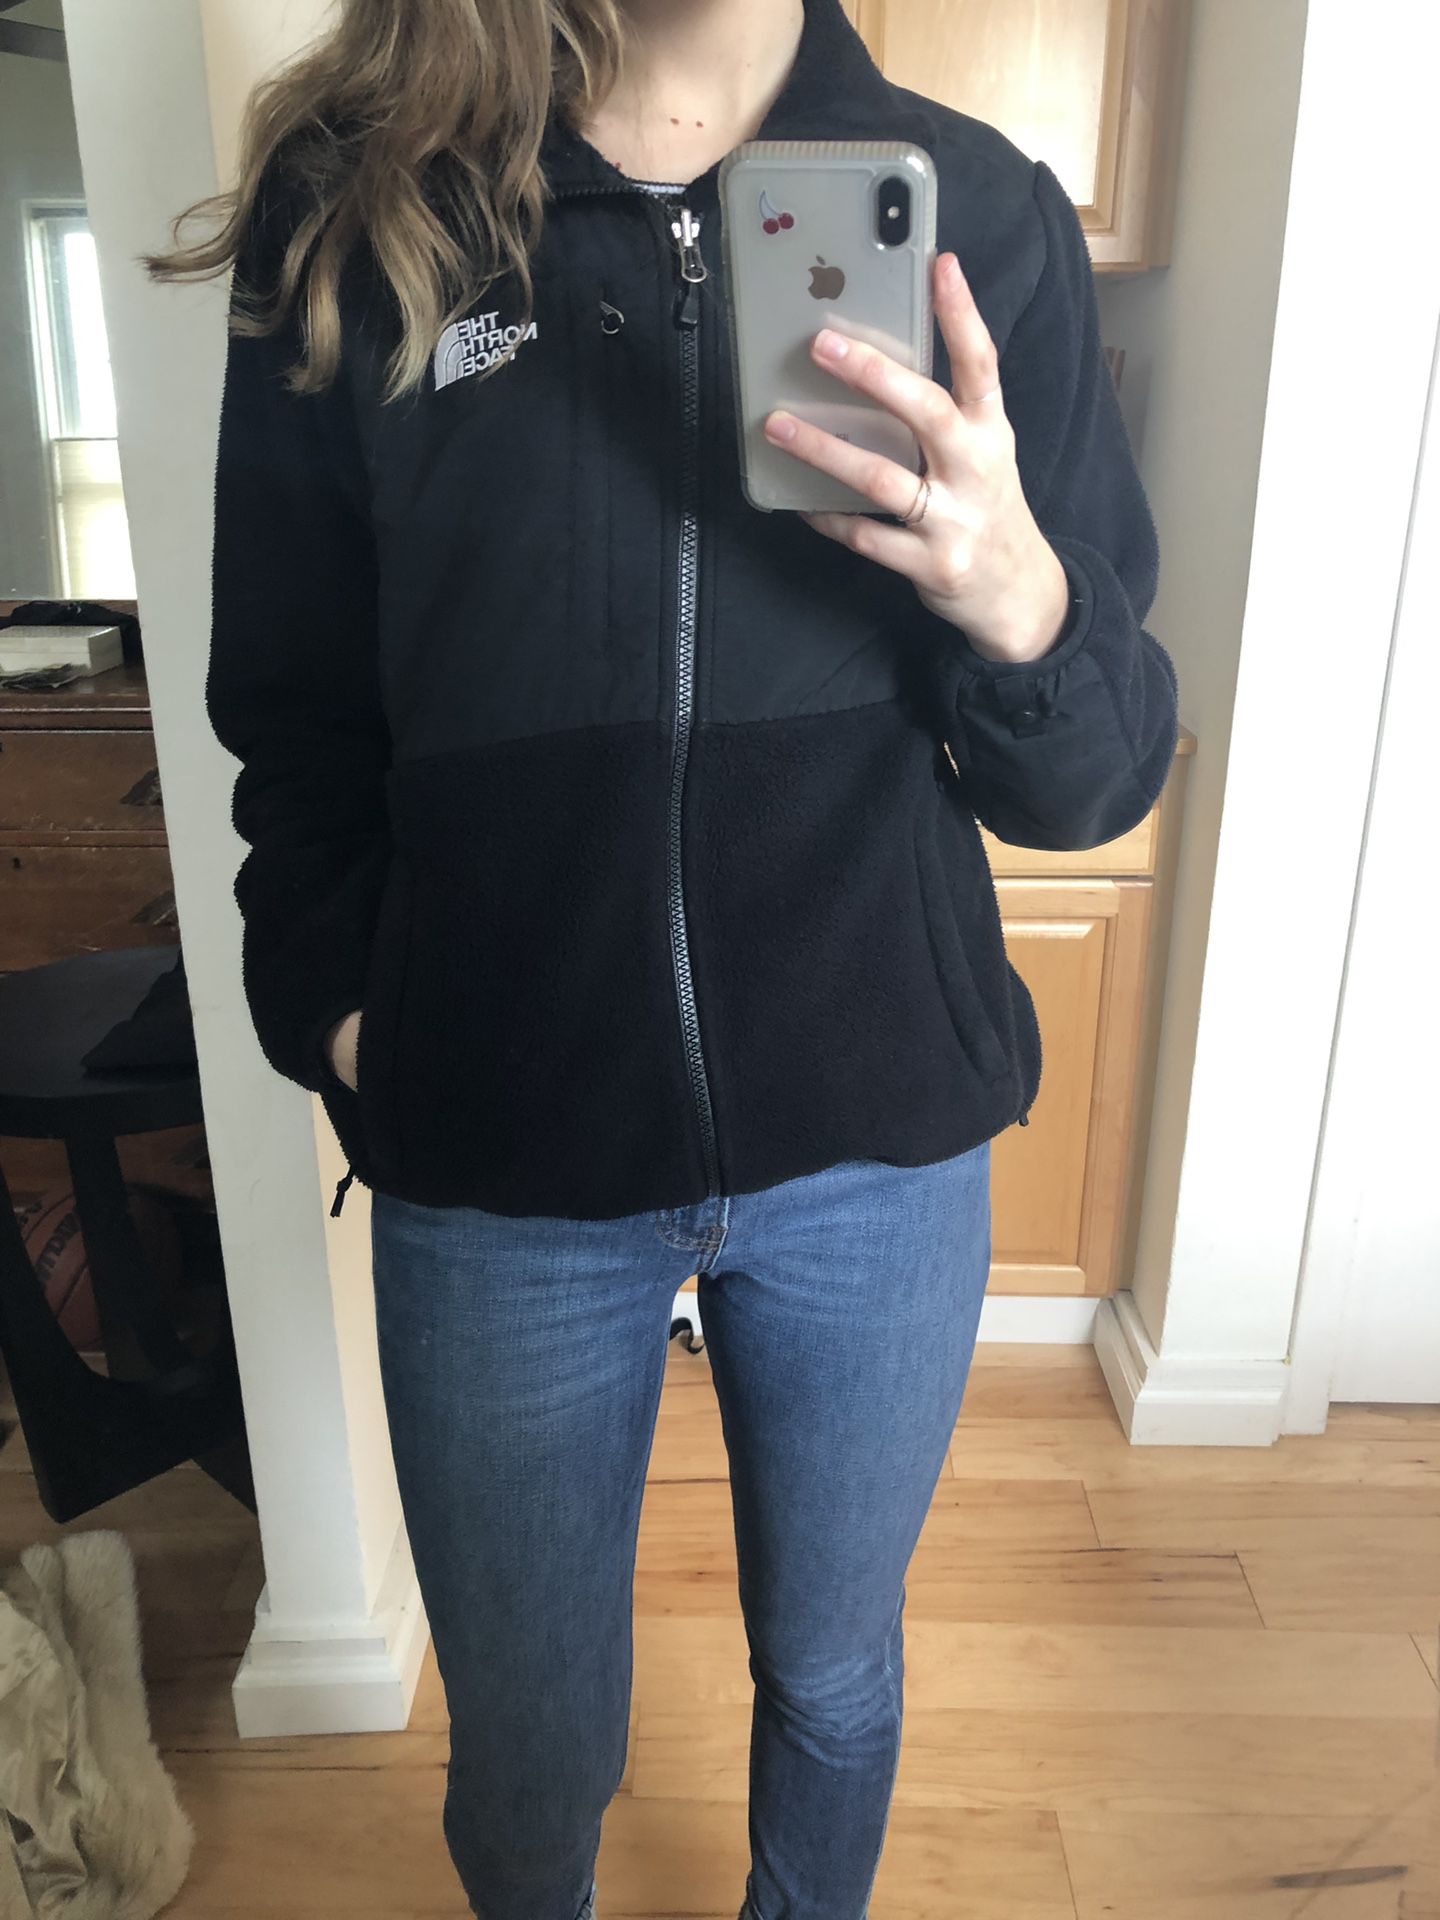 North Face Women's Denali Jacket - Size Small - $60 for Sale in San Rafael,  CA - OfferUp